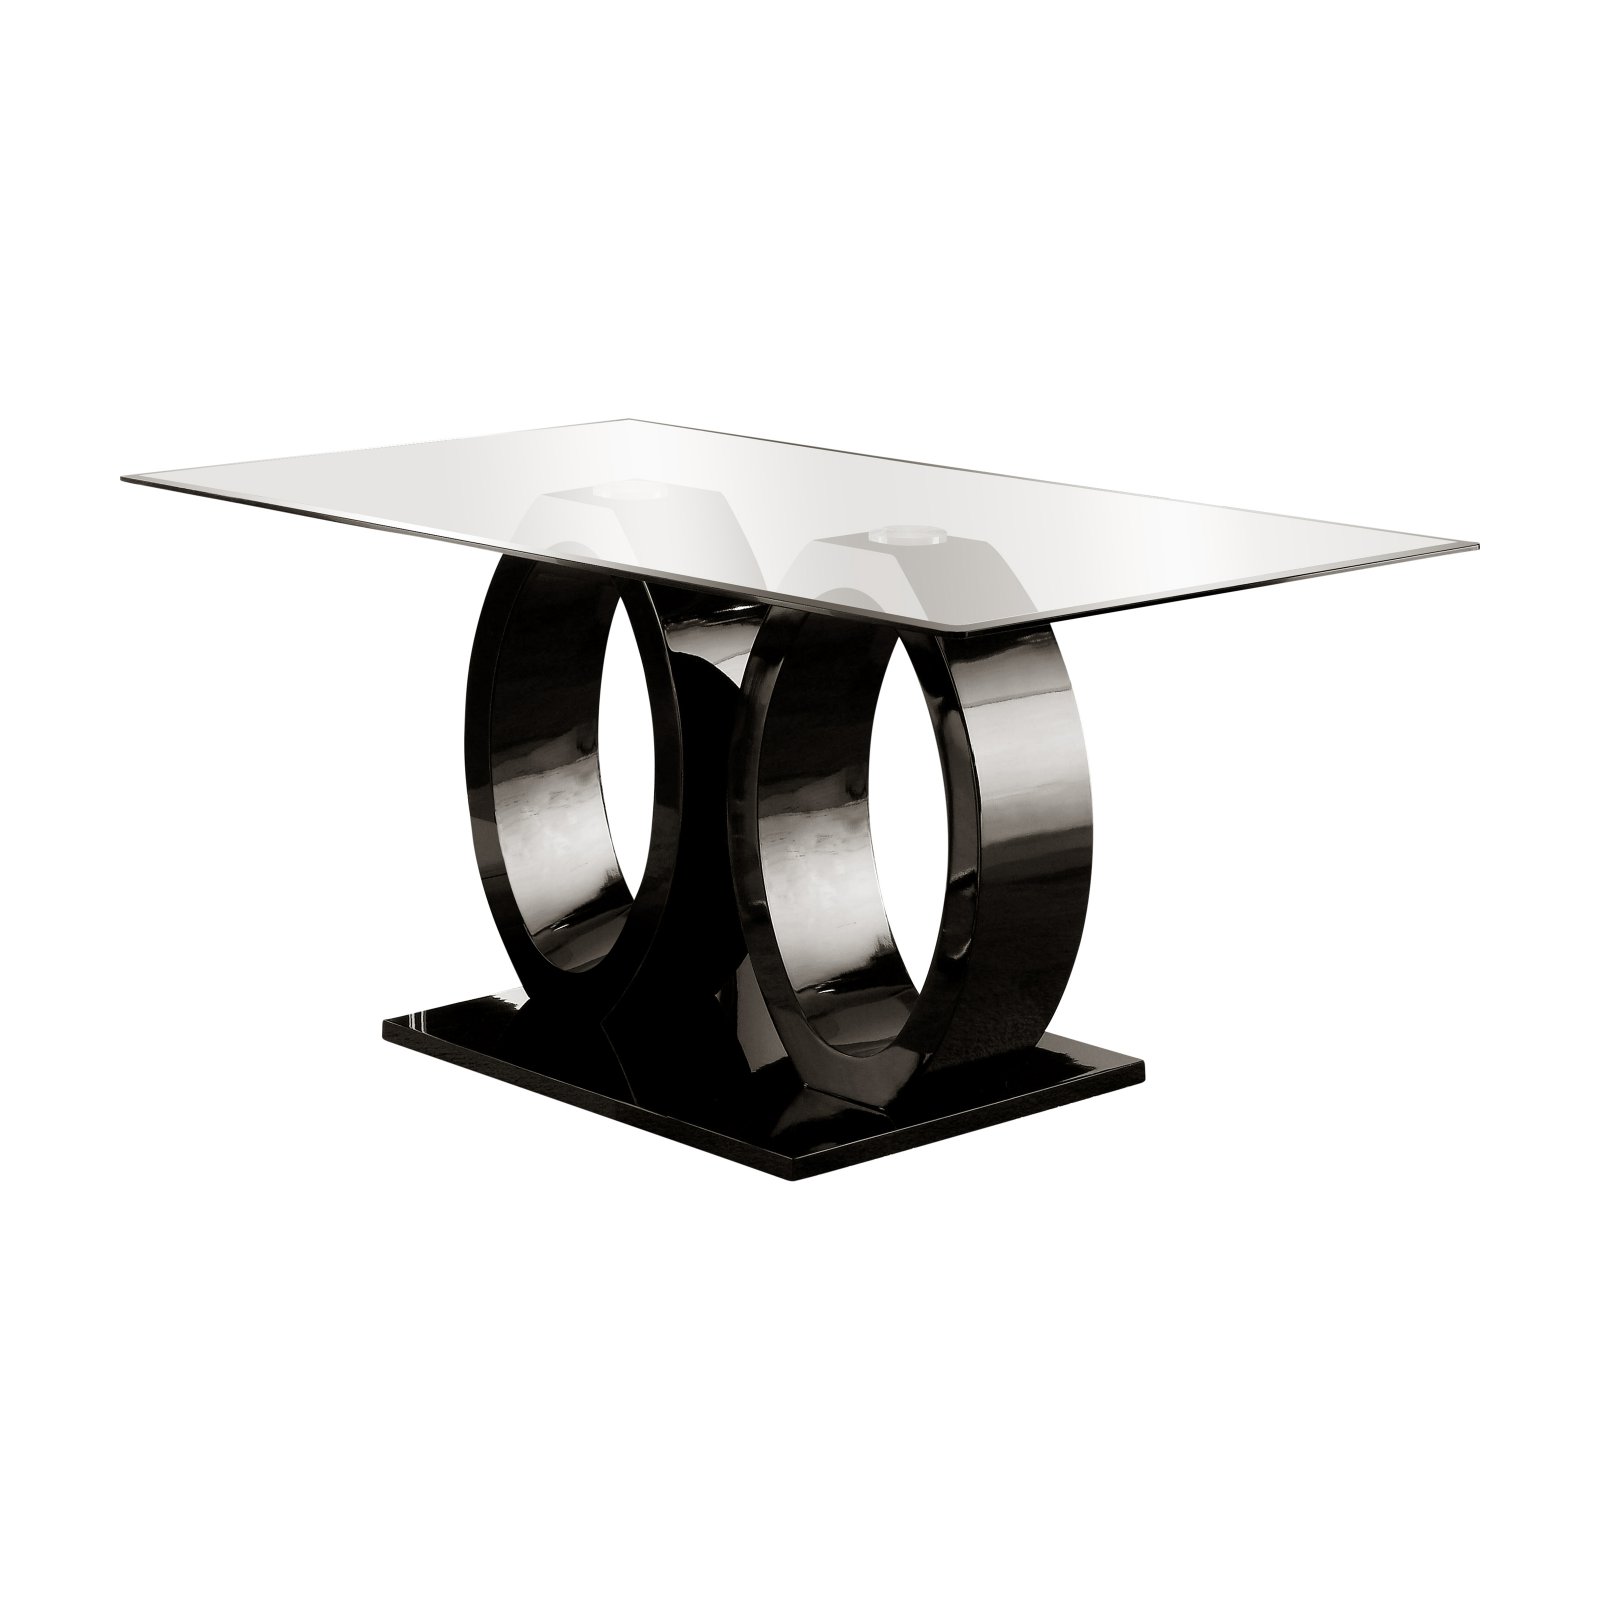 Furniture of America Damore Contemporary High Gloss Dining Table - image 2 of 9